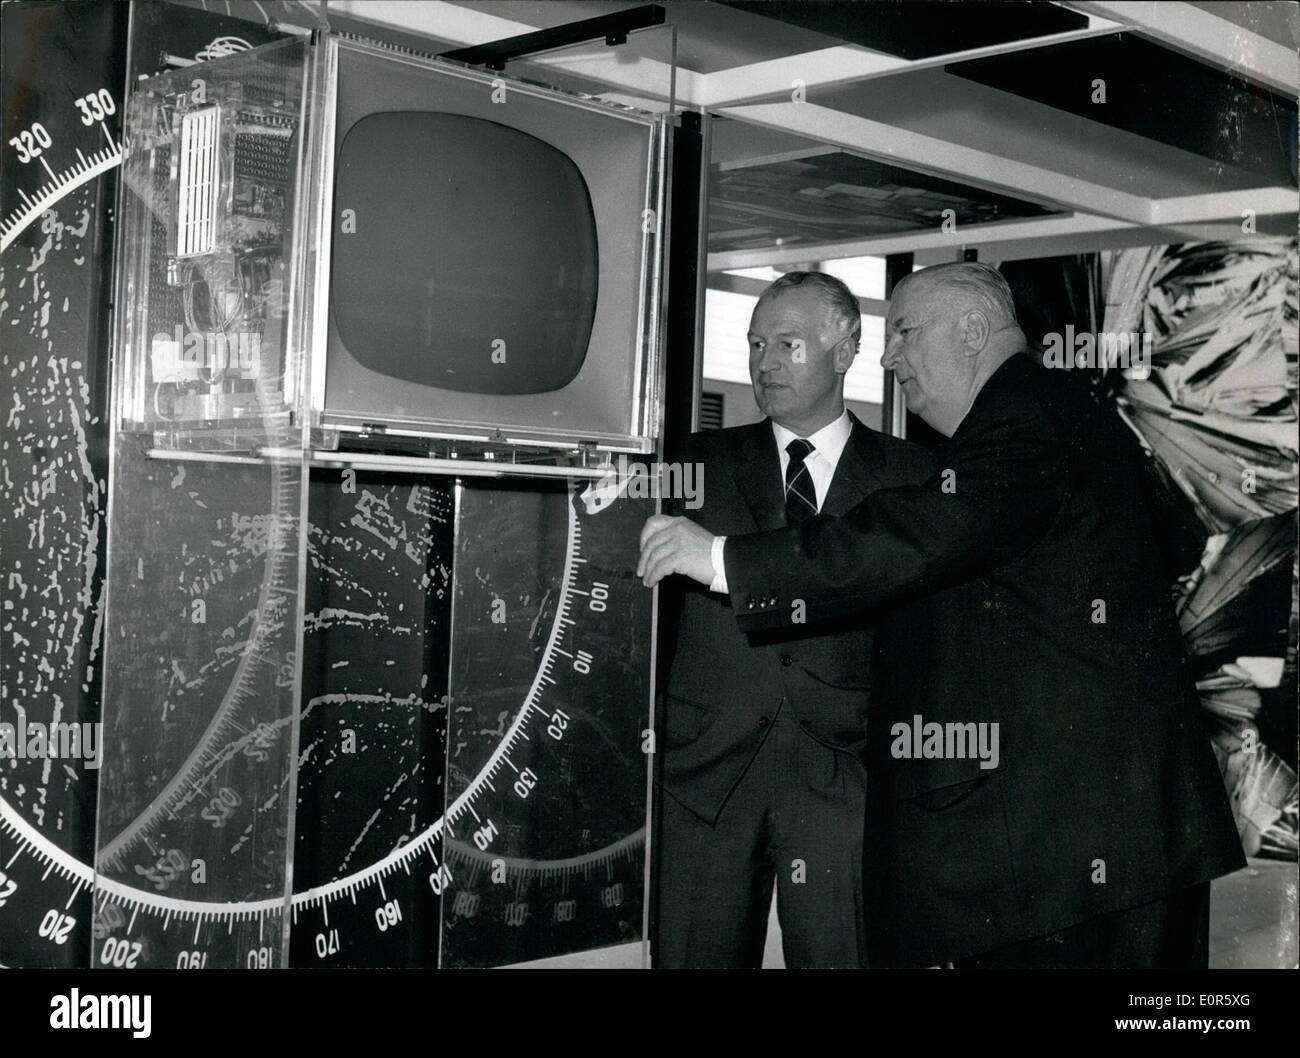 Apr. 04, 1958 - In the German pavilion on the international exhibition: we were meeting the''man of thousand tricks'', the former chief of the racing stud of the firm Daimler-Benz, Alfred Neubauer together with Karl Kling. But they didn't tell us whether they were coming clear of the Siemens-plexi glass television. Our picture shows: Alfred Neubauer (right side) and Karl Kling in the German pavilion, before the Siemens-plexi-glass-television. Stock Photo